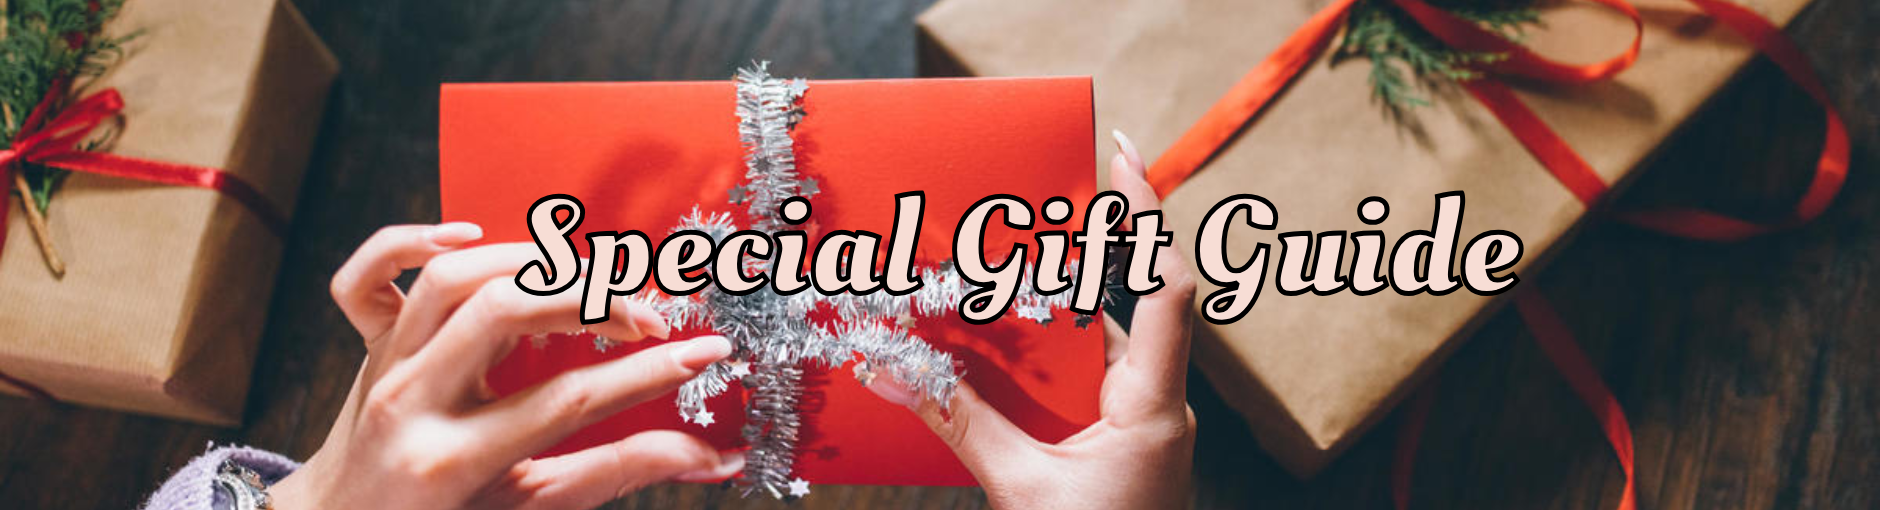 AuroHome_Special_Gift